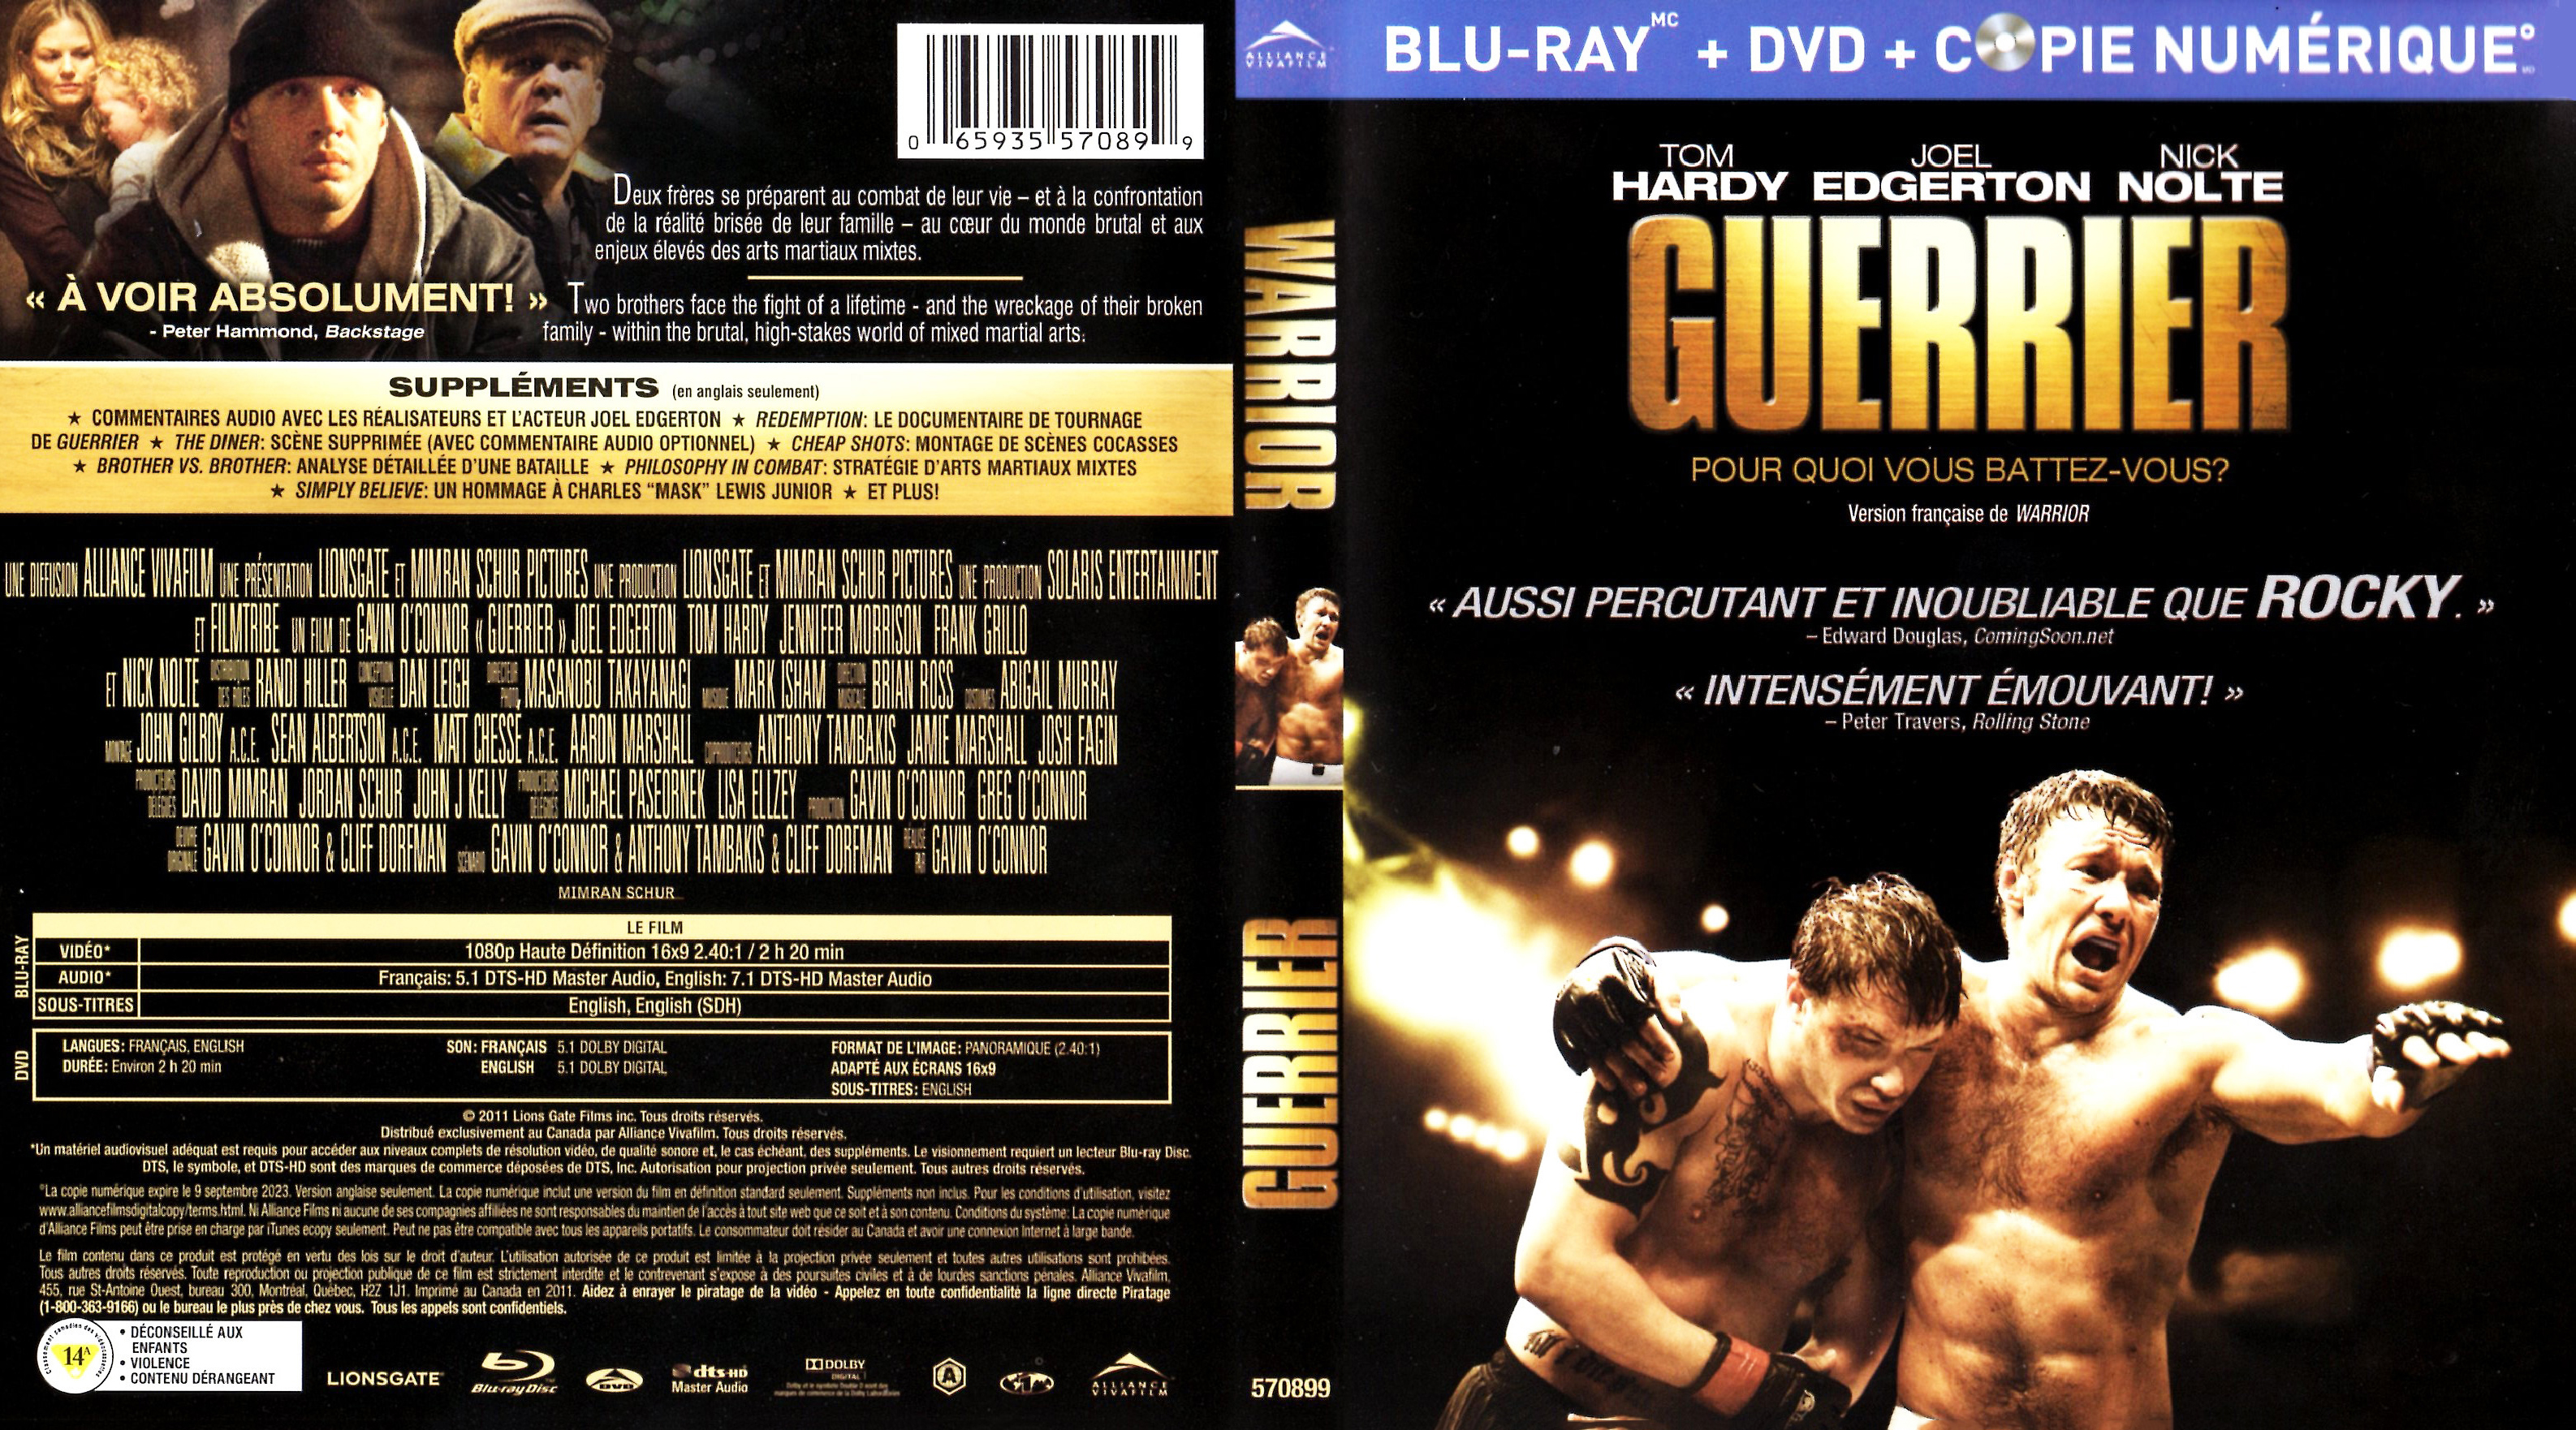 Jaquette DVD Guerrier - Warrior (Canadienne) (BLU-RAY)